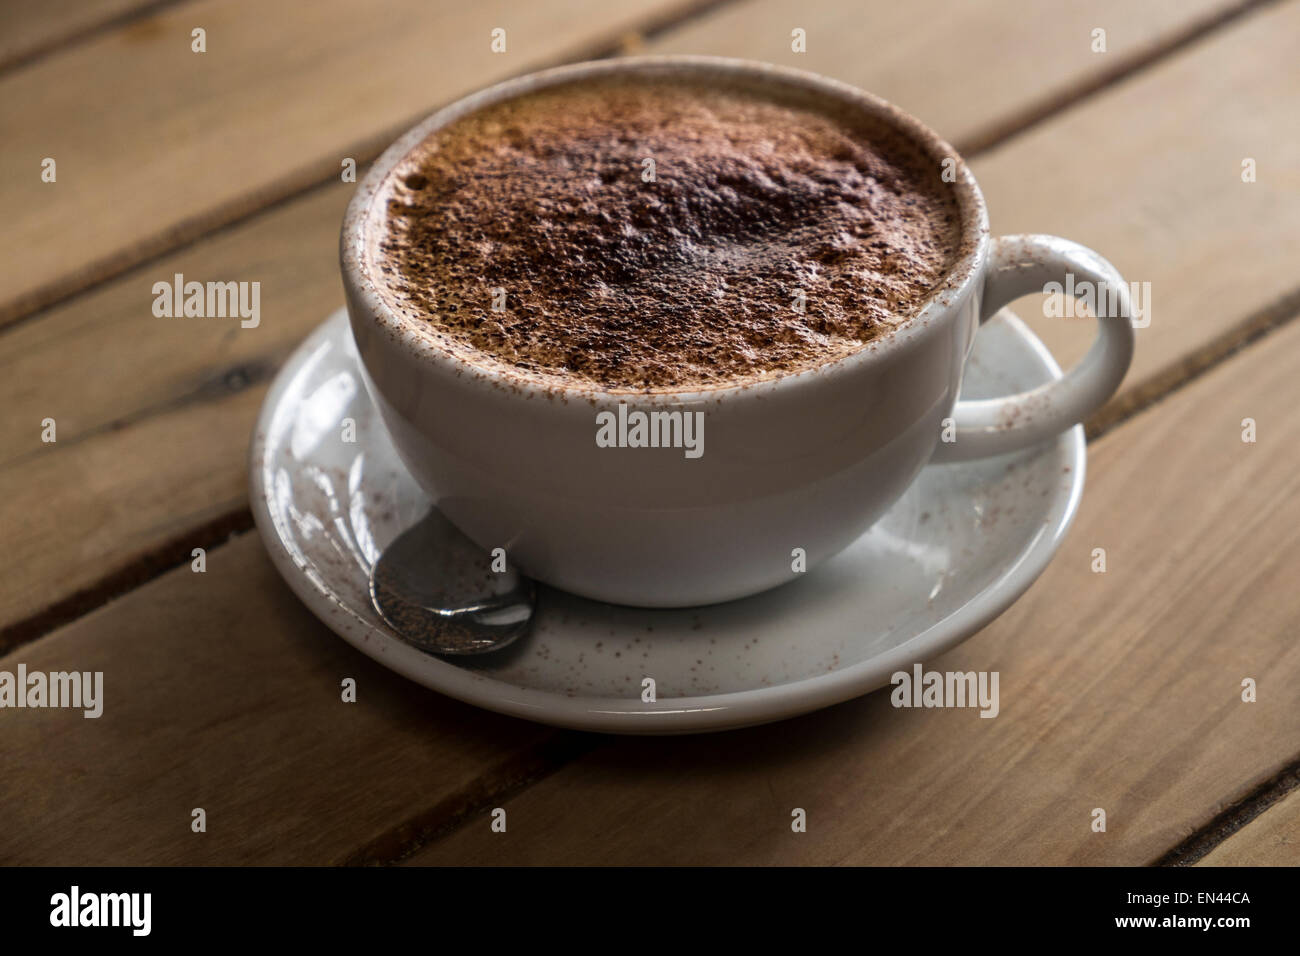 Creamy cappuccino topped with chocolate. Stock Photo